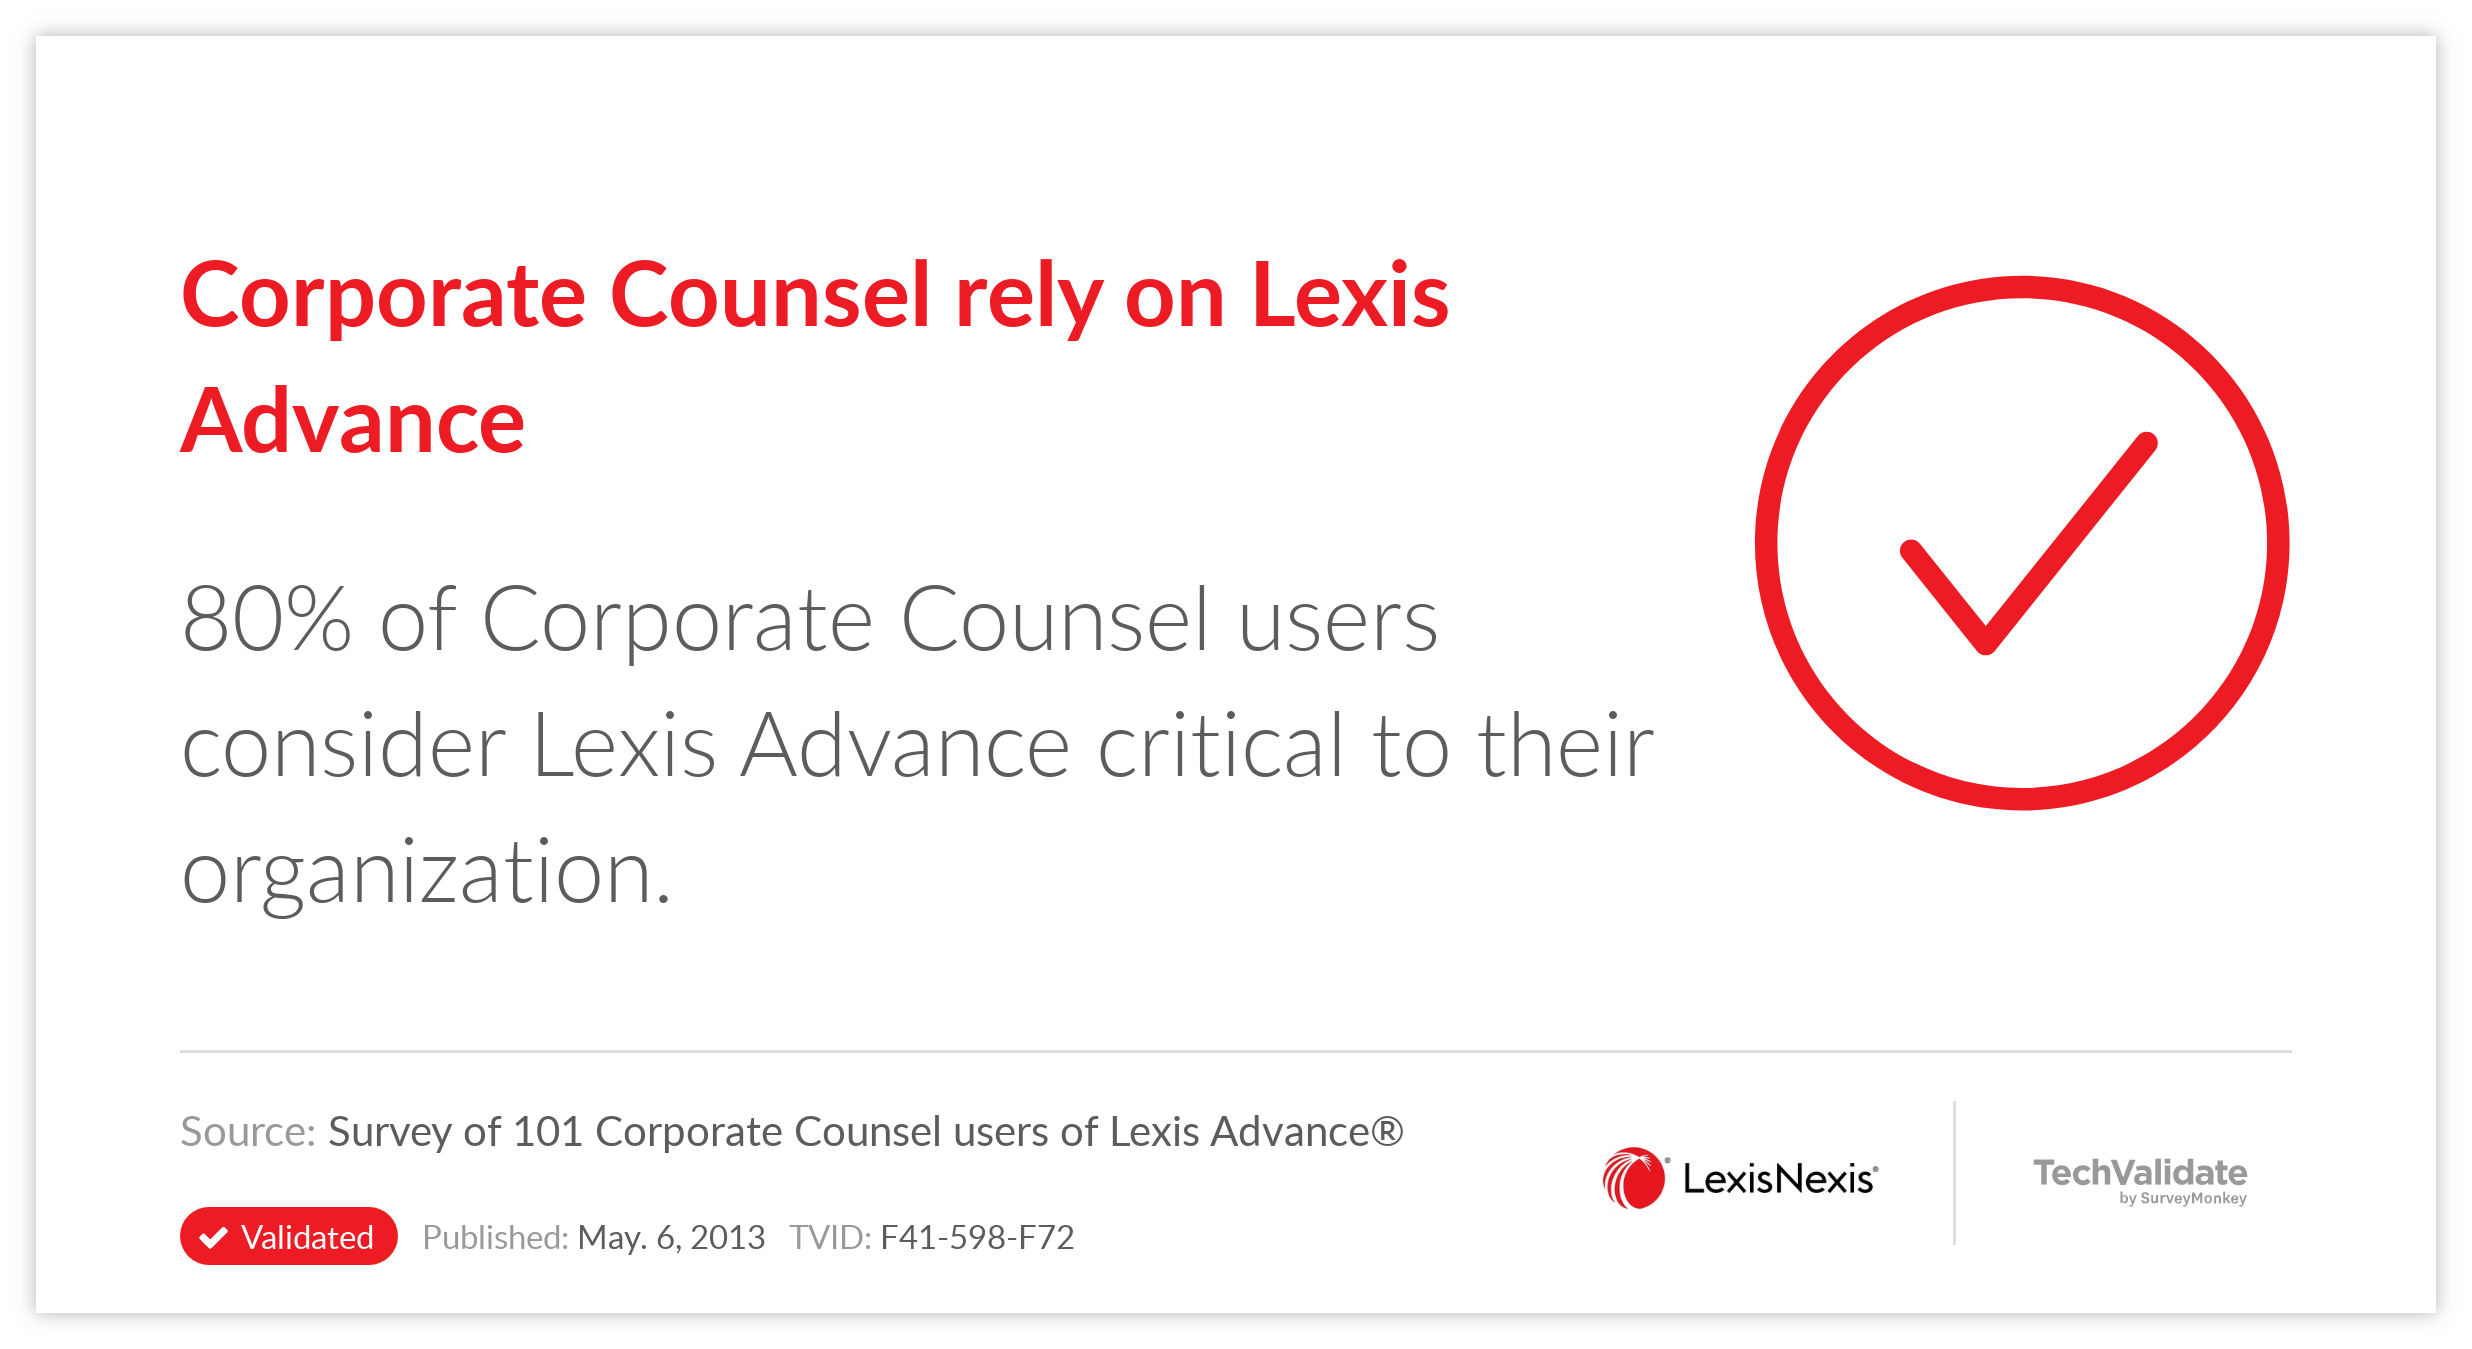 Corporate Counsel rely on Lexis Advance